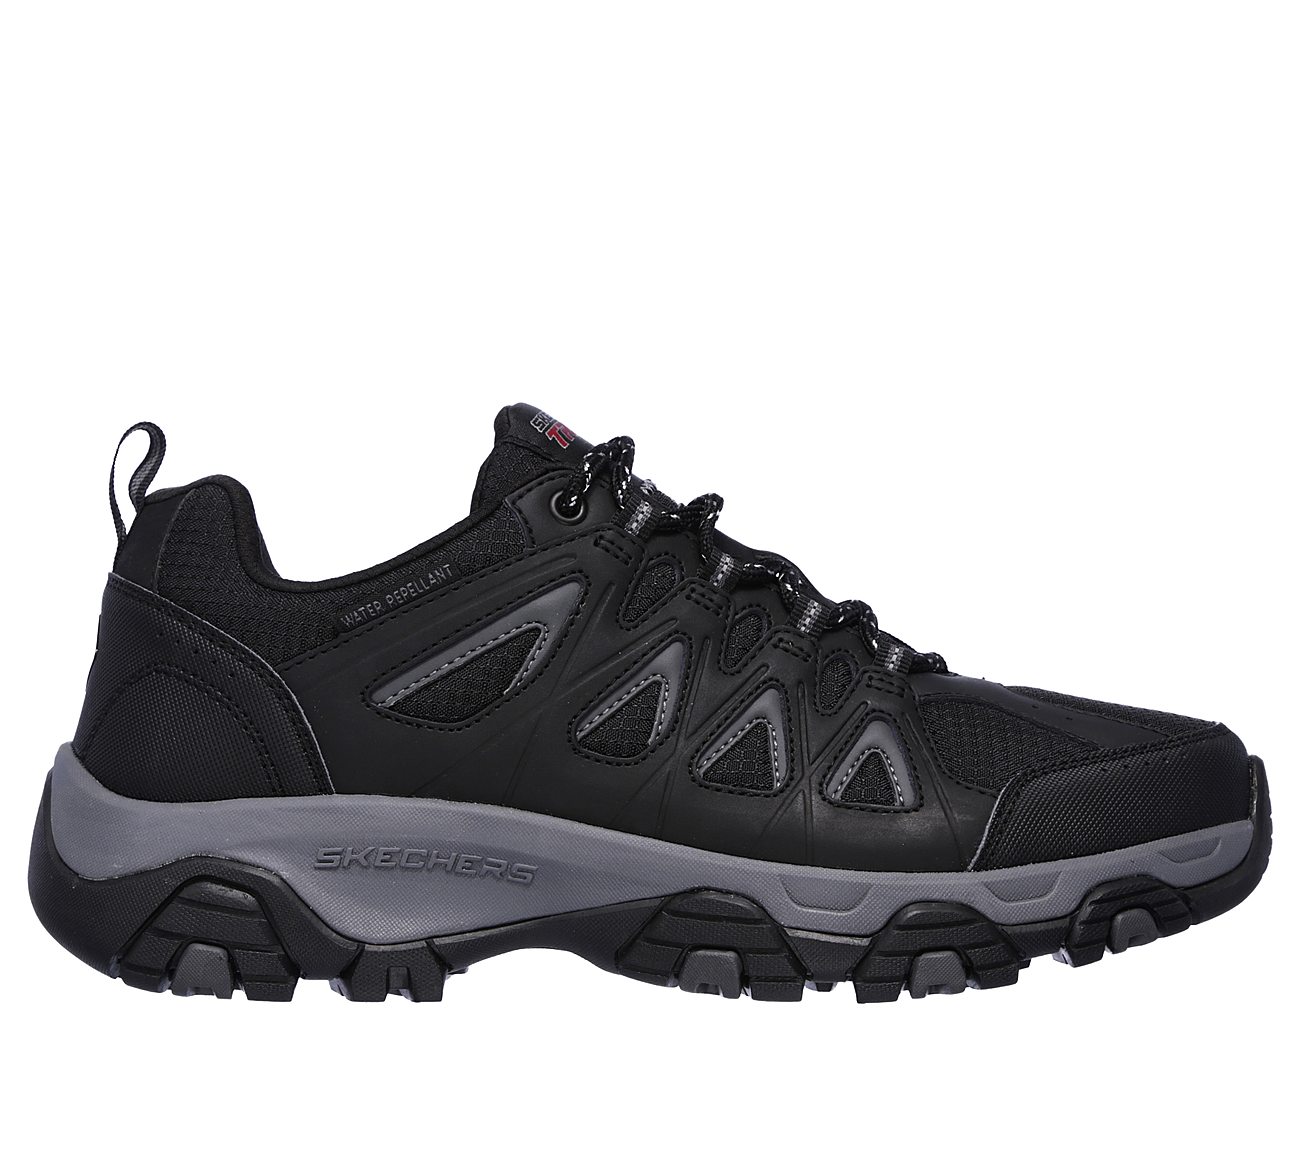 SKECHERS Terrabite Lace-Up Sneakers Shoes